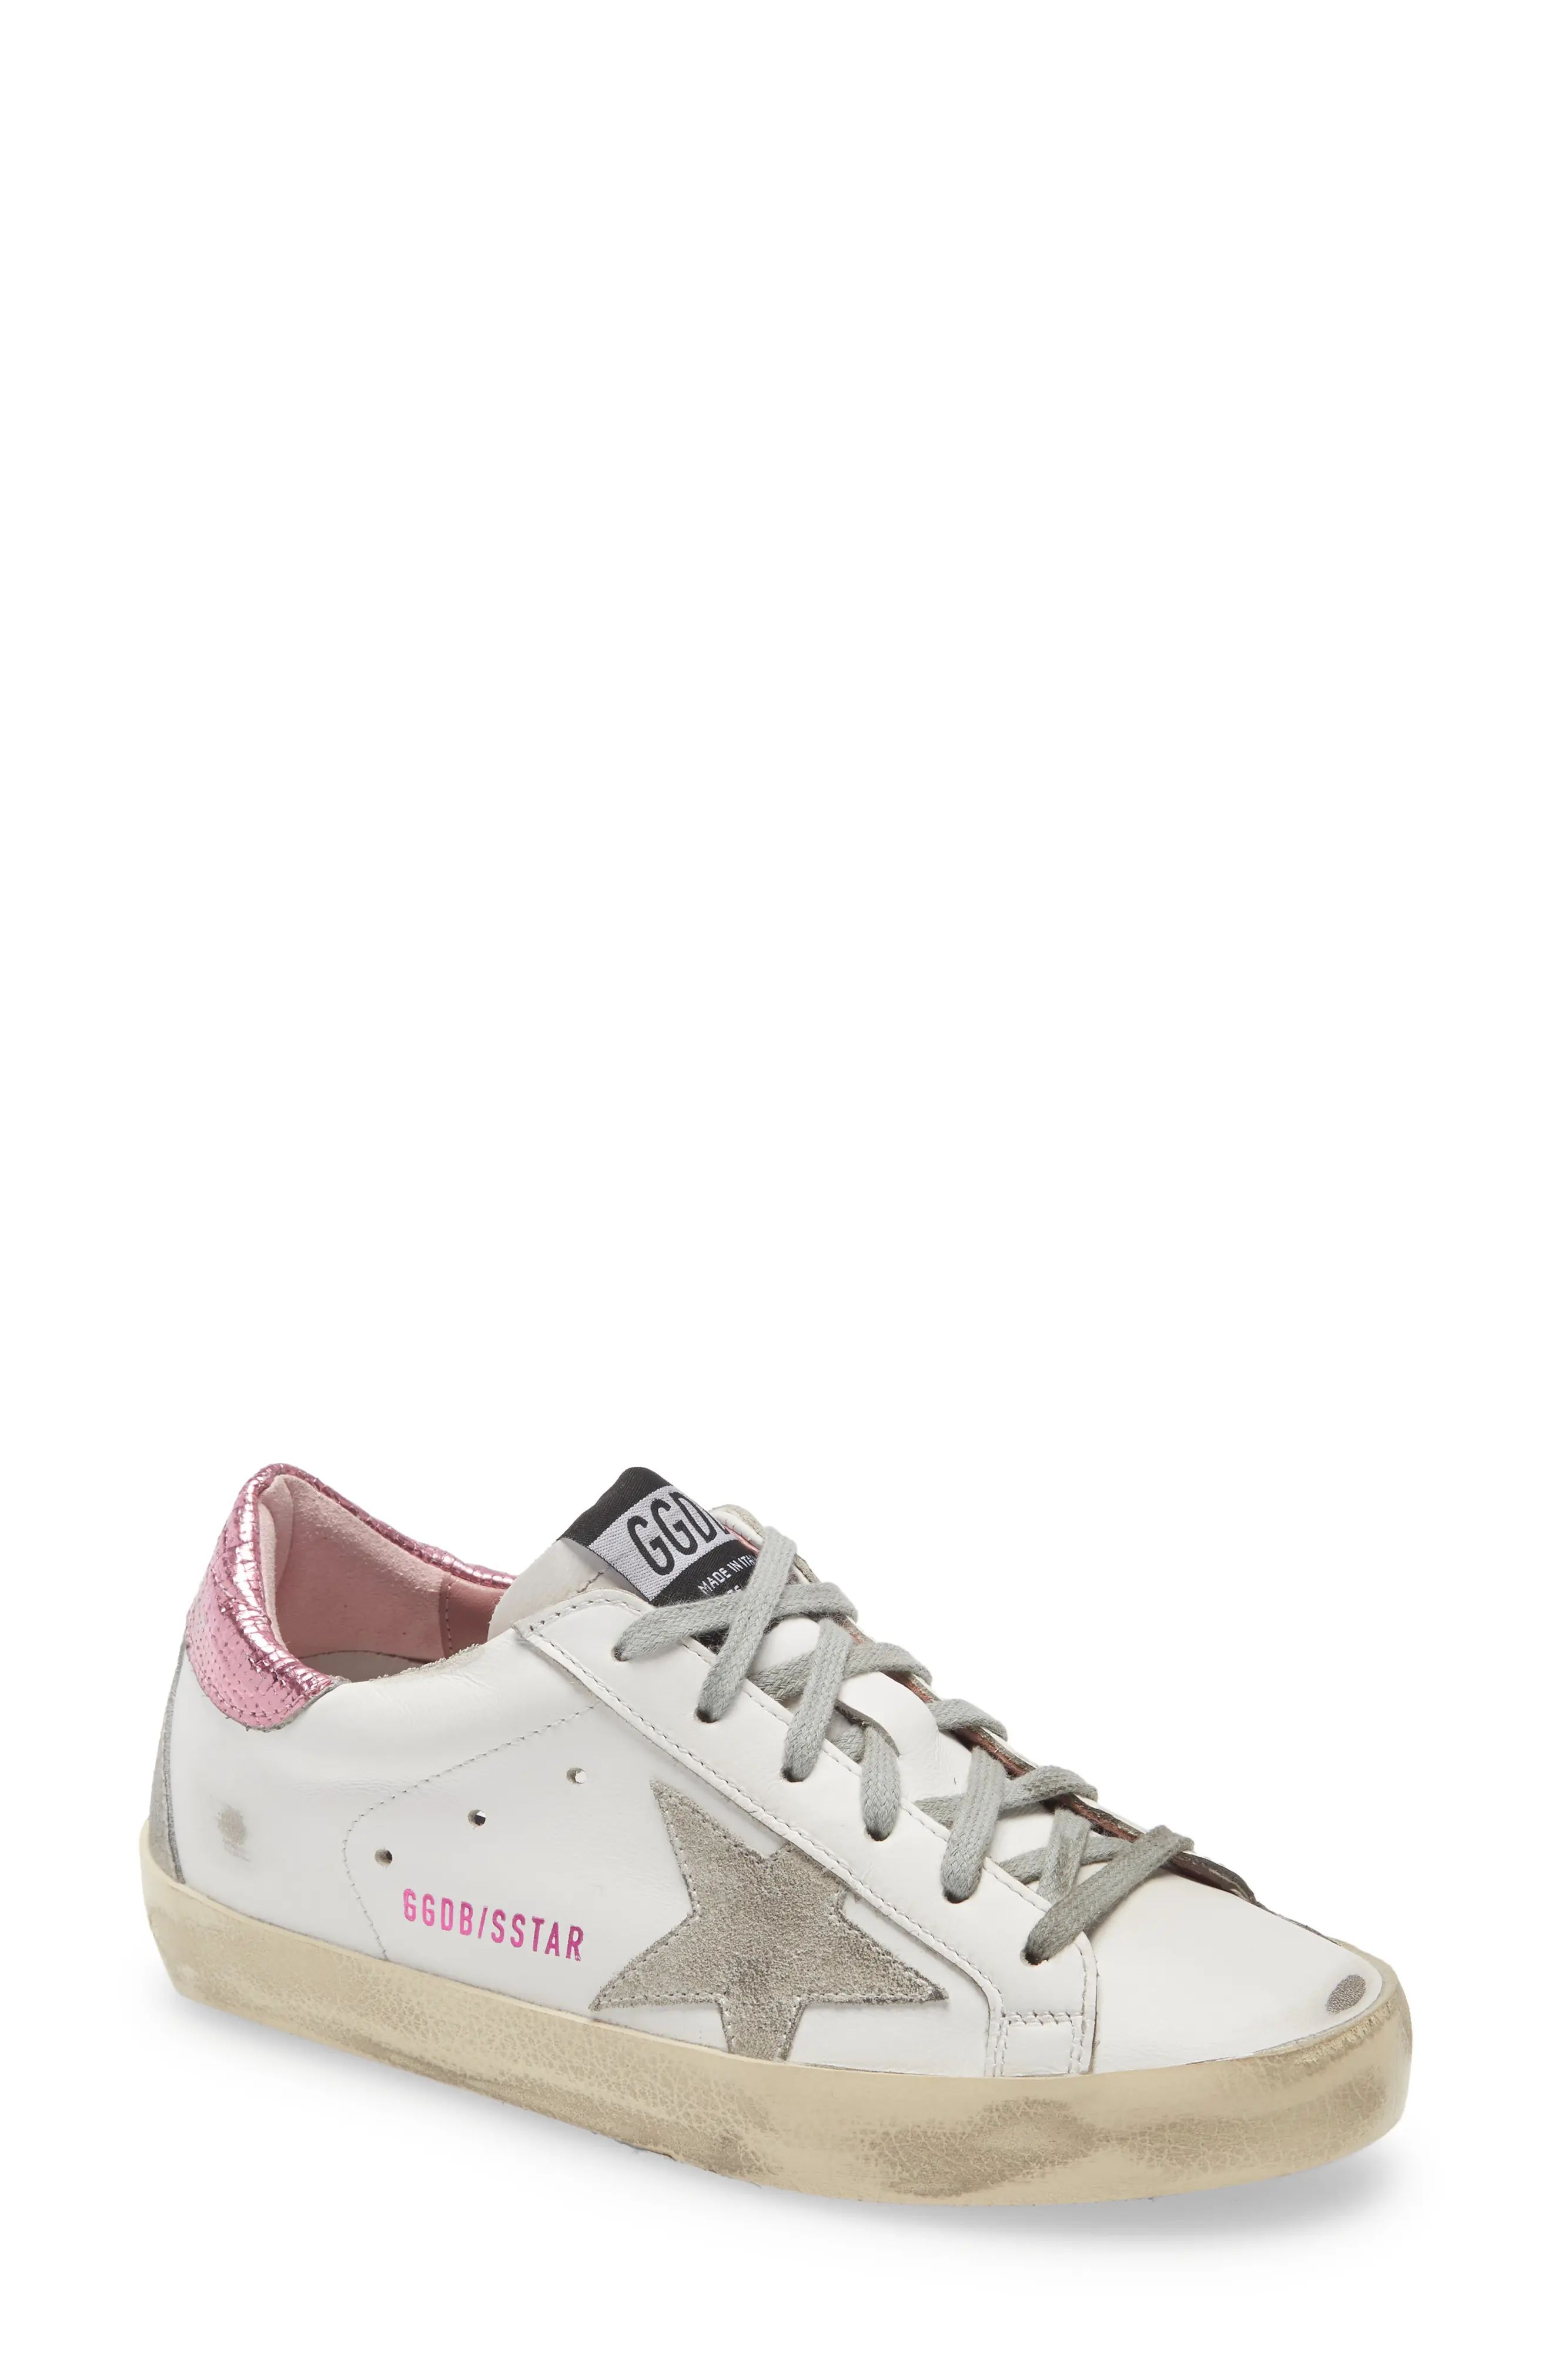 Golden Goose Super-Star Low Top Sneaker, Size 4Us in White/ice/pink at Nordstrom | Nordstrom